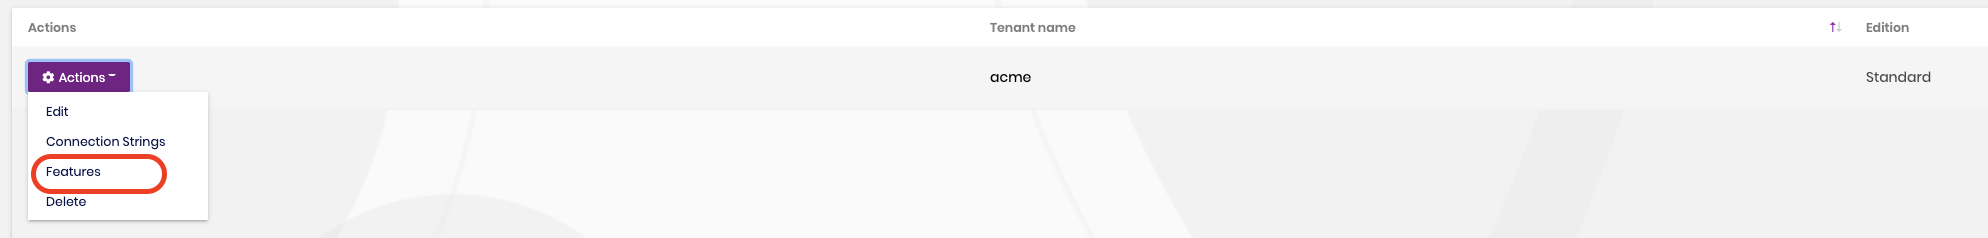 tenant-features